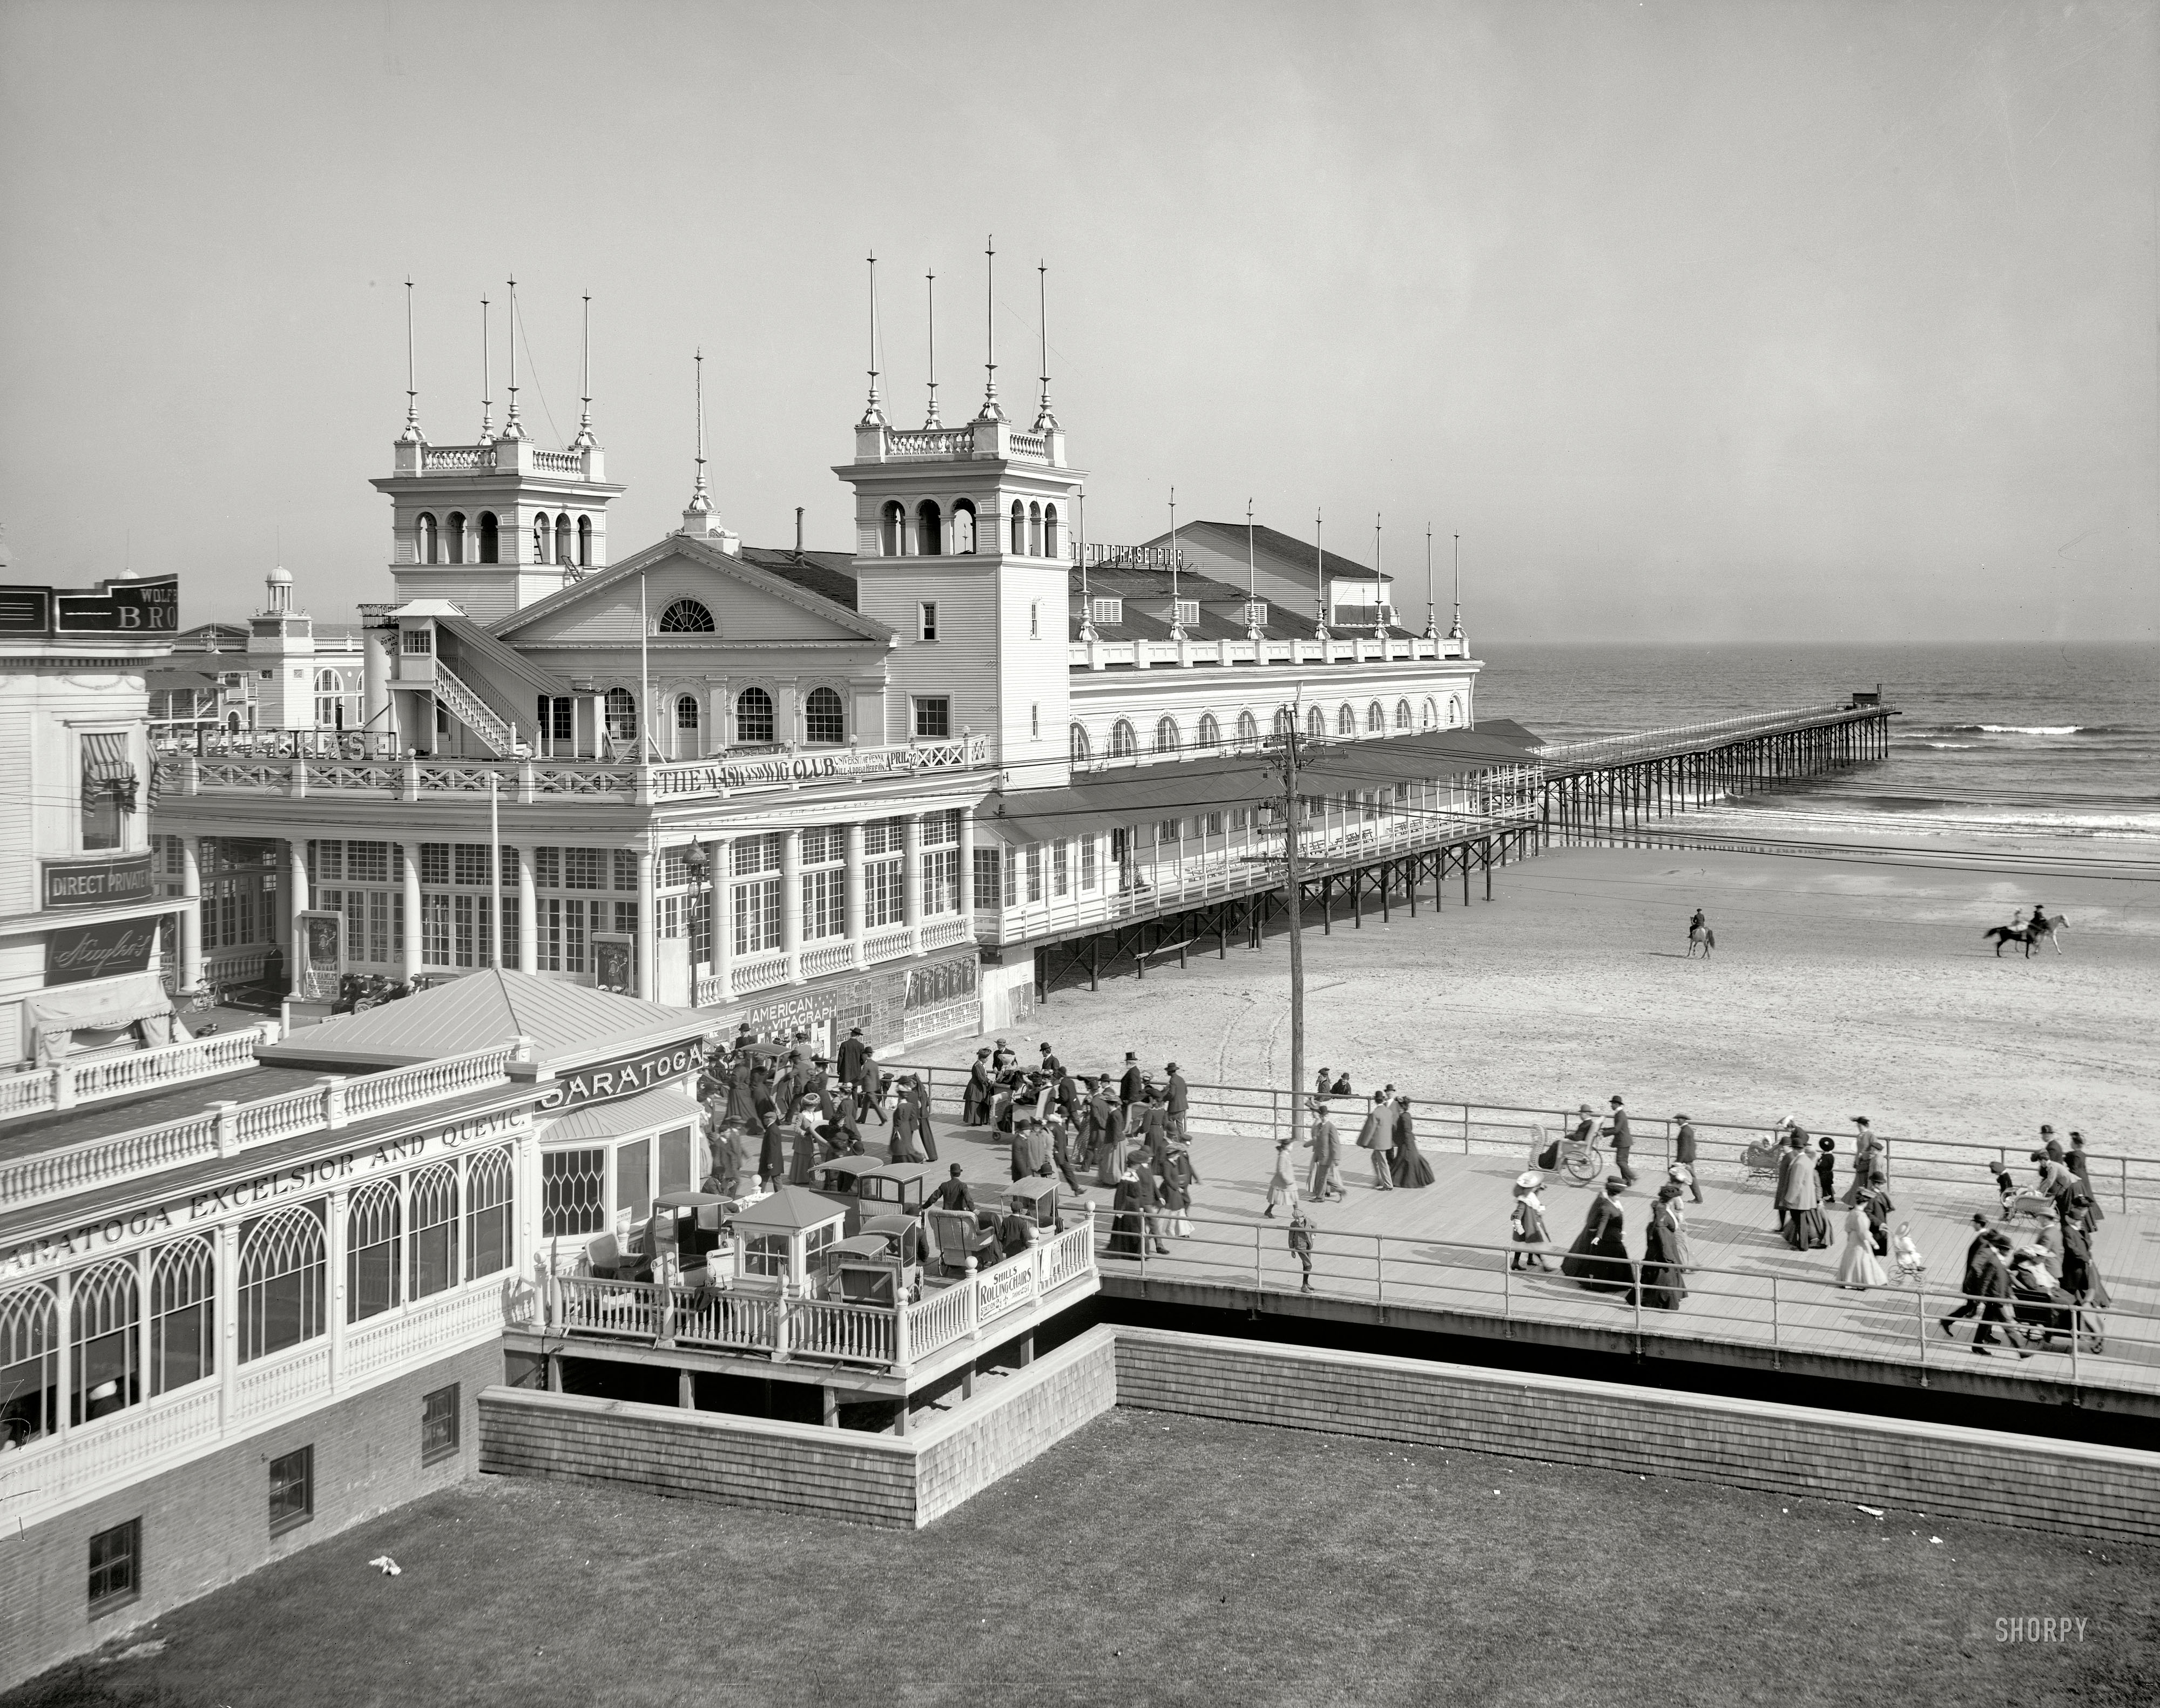 The Jersey Shore circa 1905. "Steeplechase Pier, Atlantic City." Appearing April 22: The Mask and Wig Club of U-Penn performing "Mr. Hamlet of Denmark." 8x10 inch dry plate glass negative, Detroit Publishing Company. View full size.